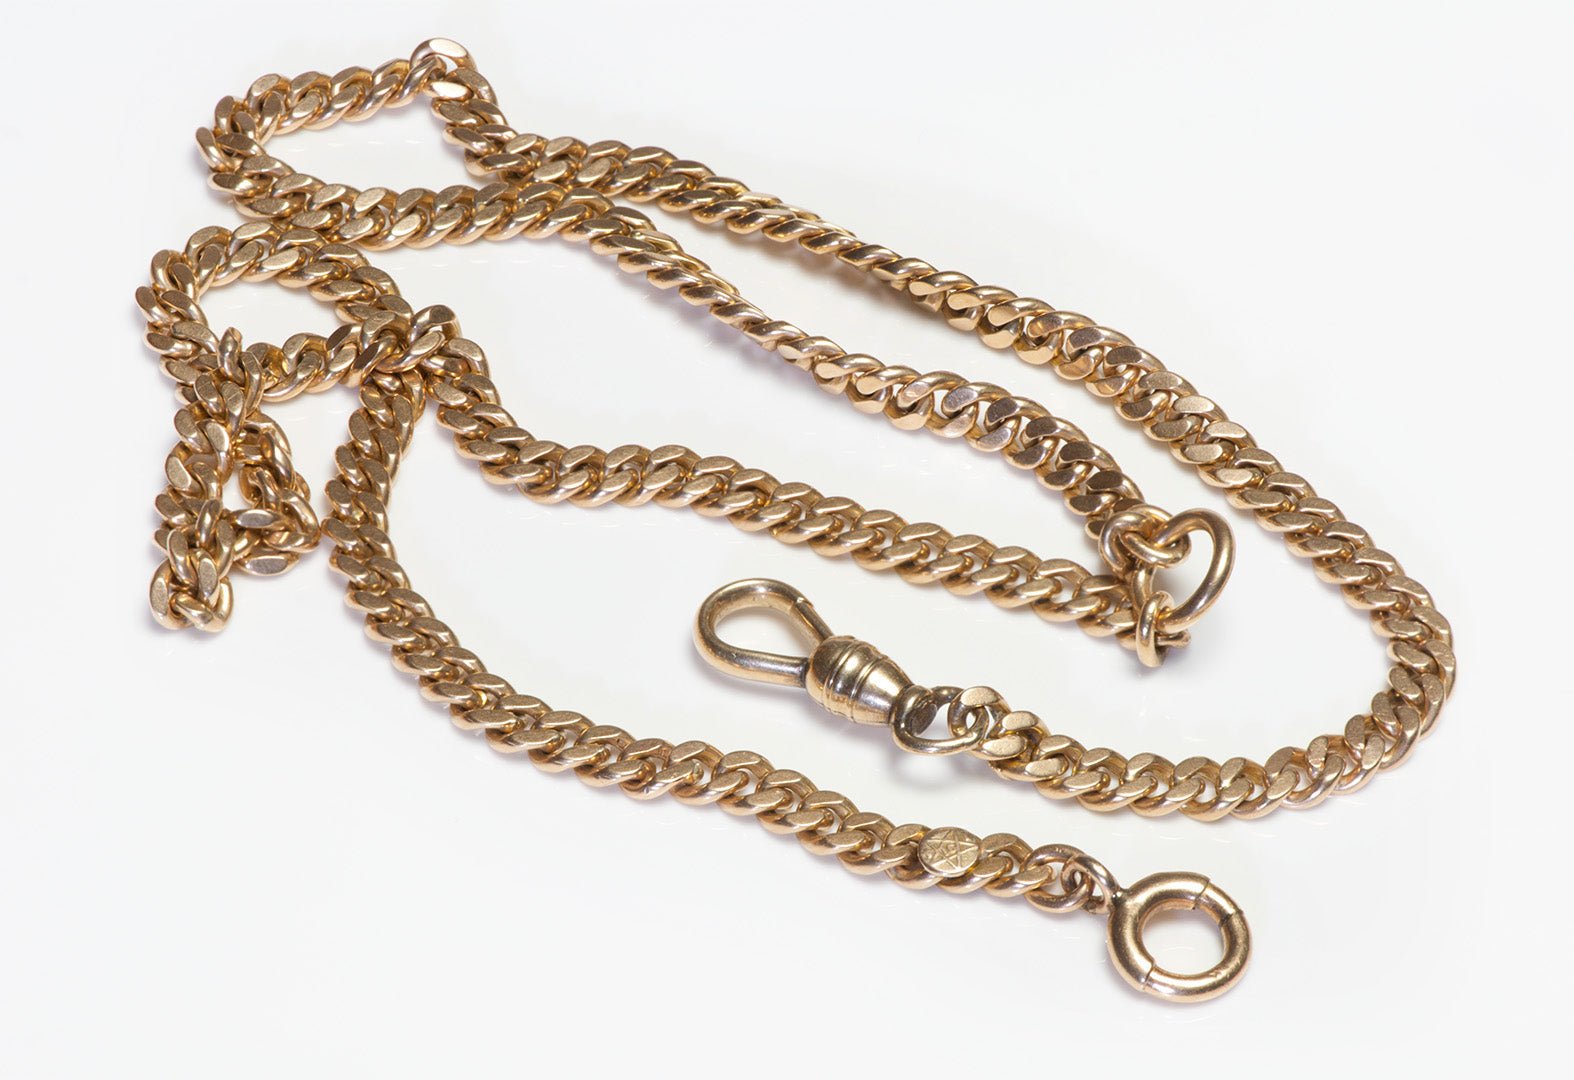 Antique Yellow Gold Pressed Link Watch Chain - DSF Antique Jewelry